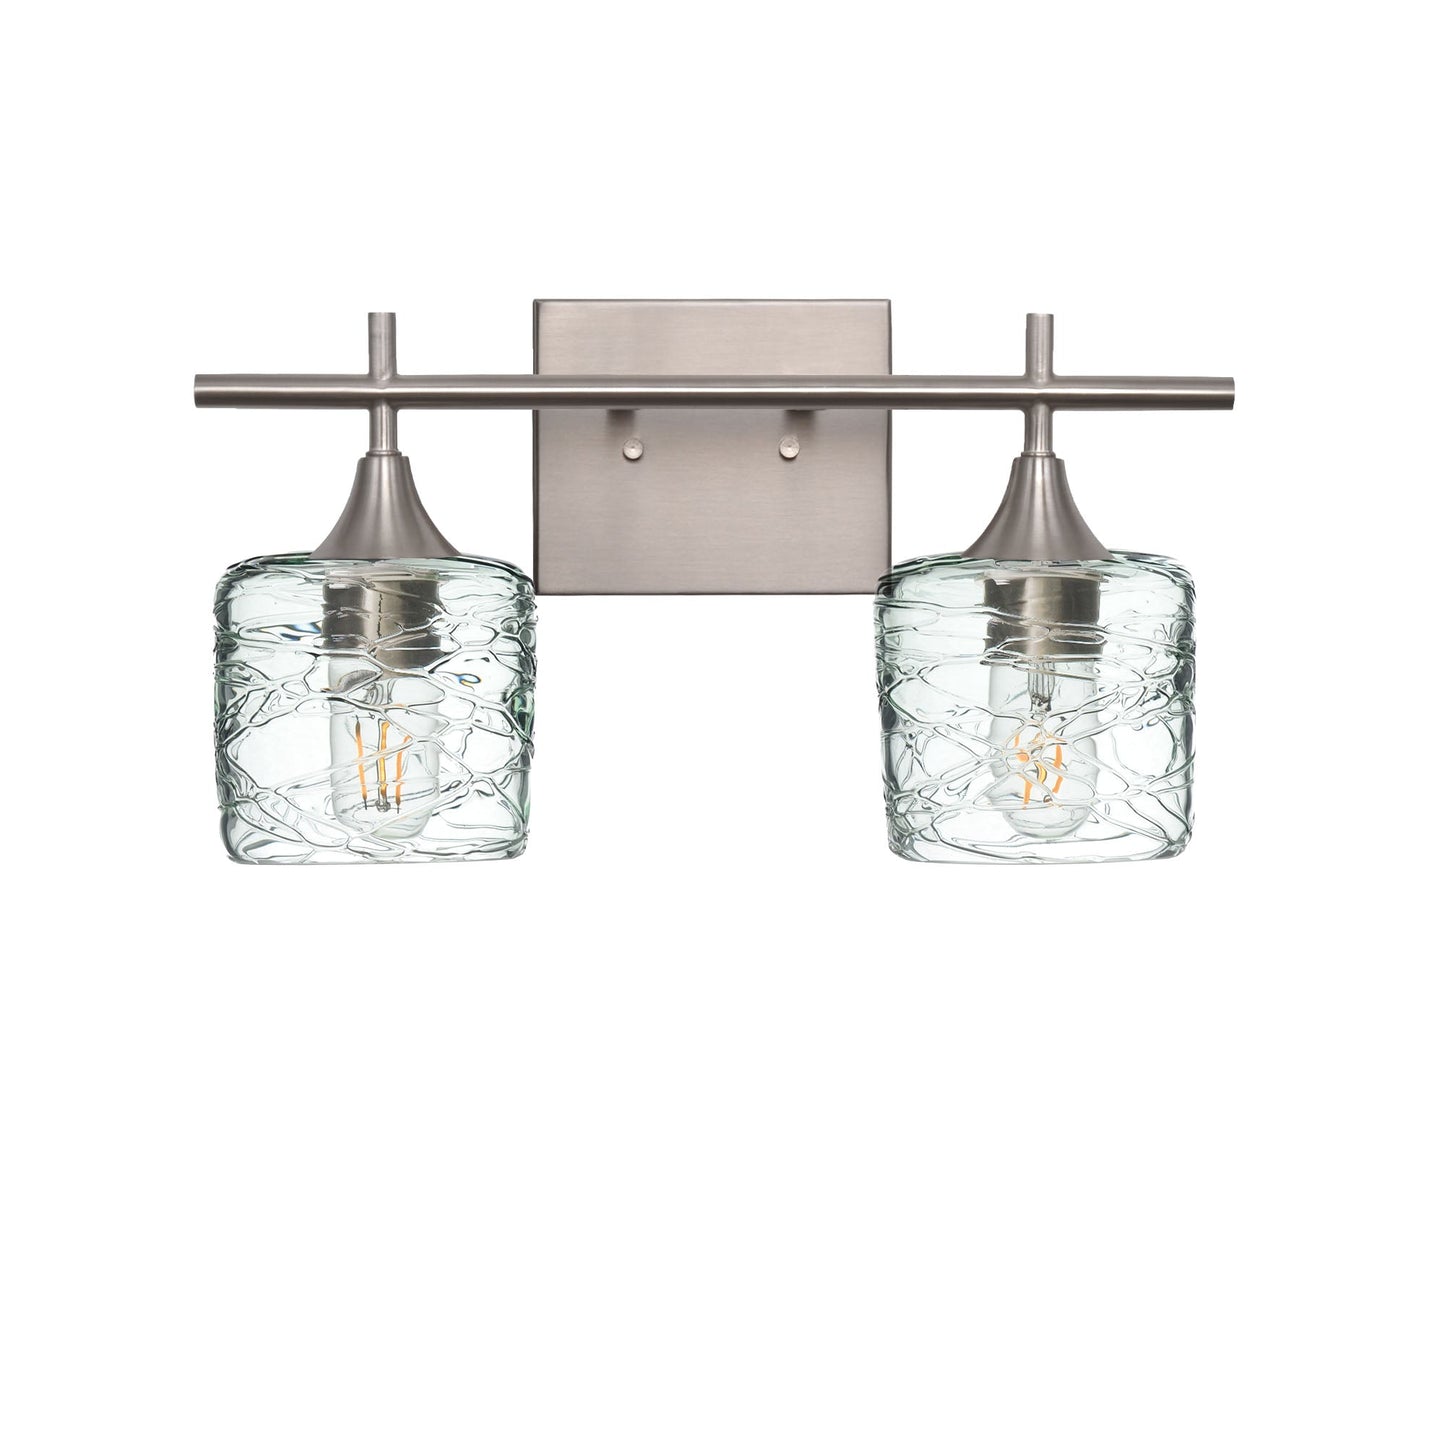 601 Spun: 2 Light Wall Vanity-Glass-Bicycle Glass Co - Hotshop-Eco Clear-Brushed Nickel-Bicycle Glass Co